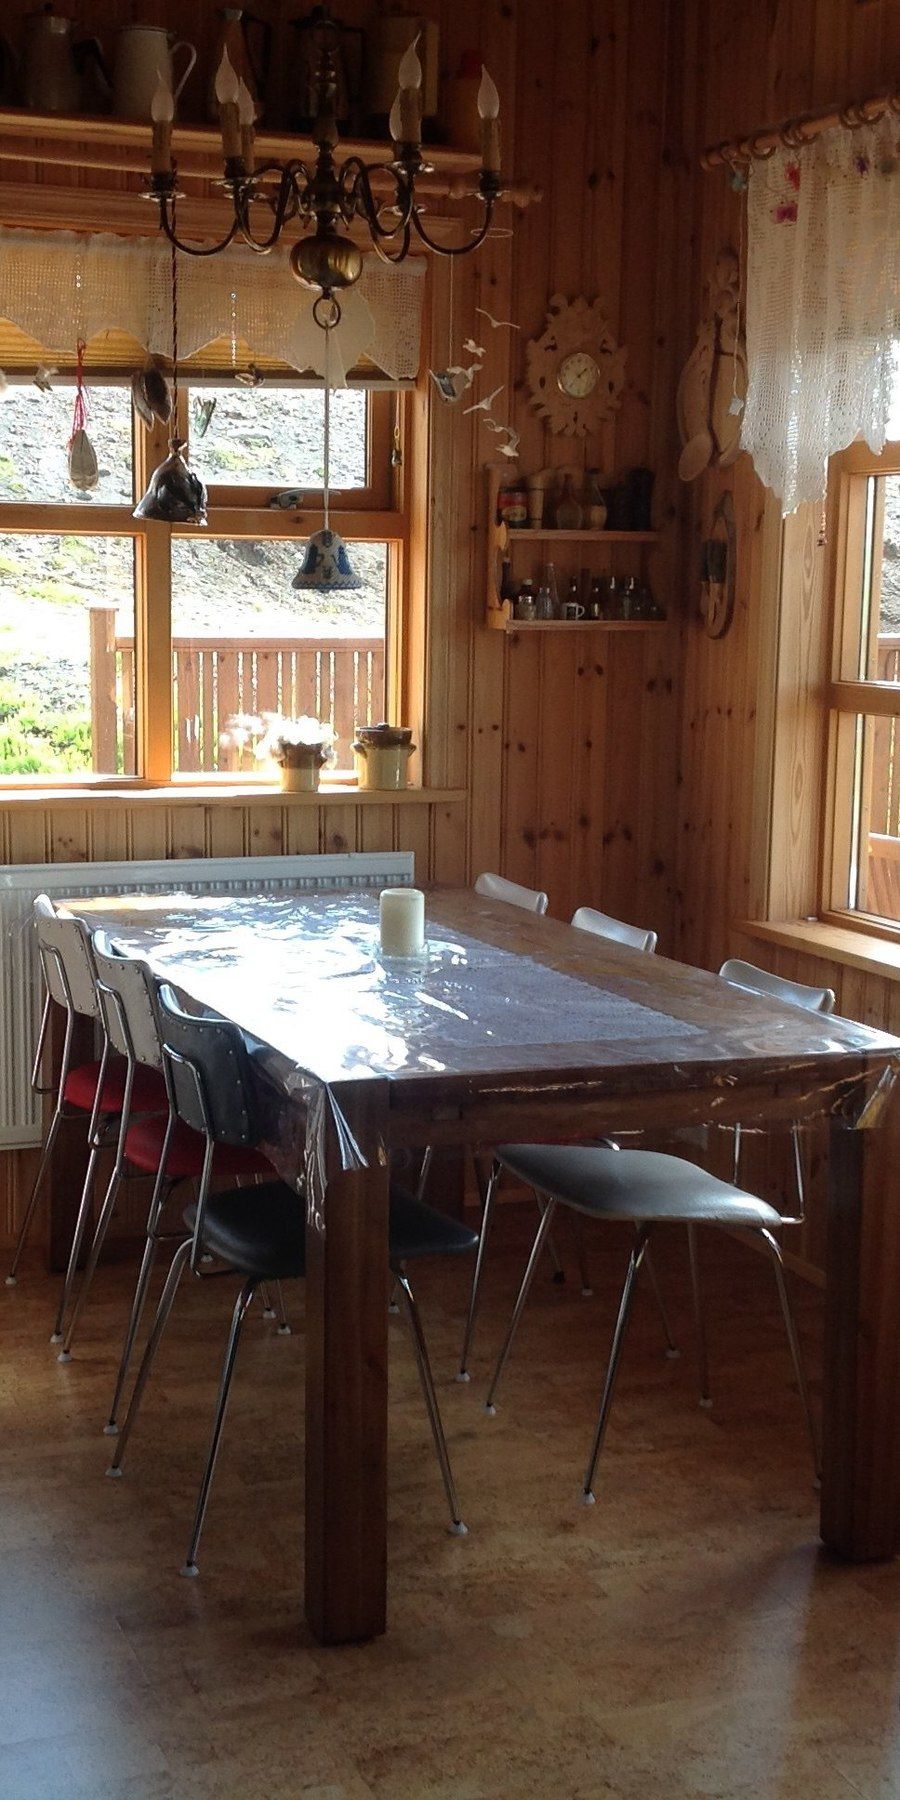 Dining area with table for six